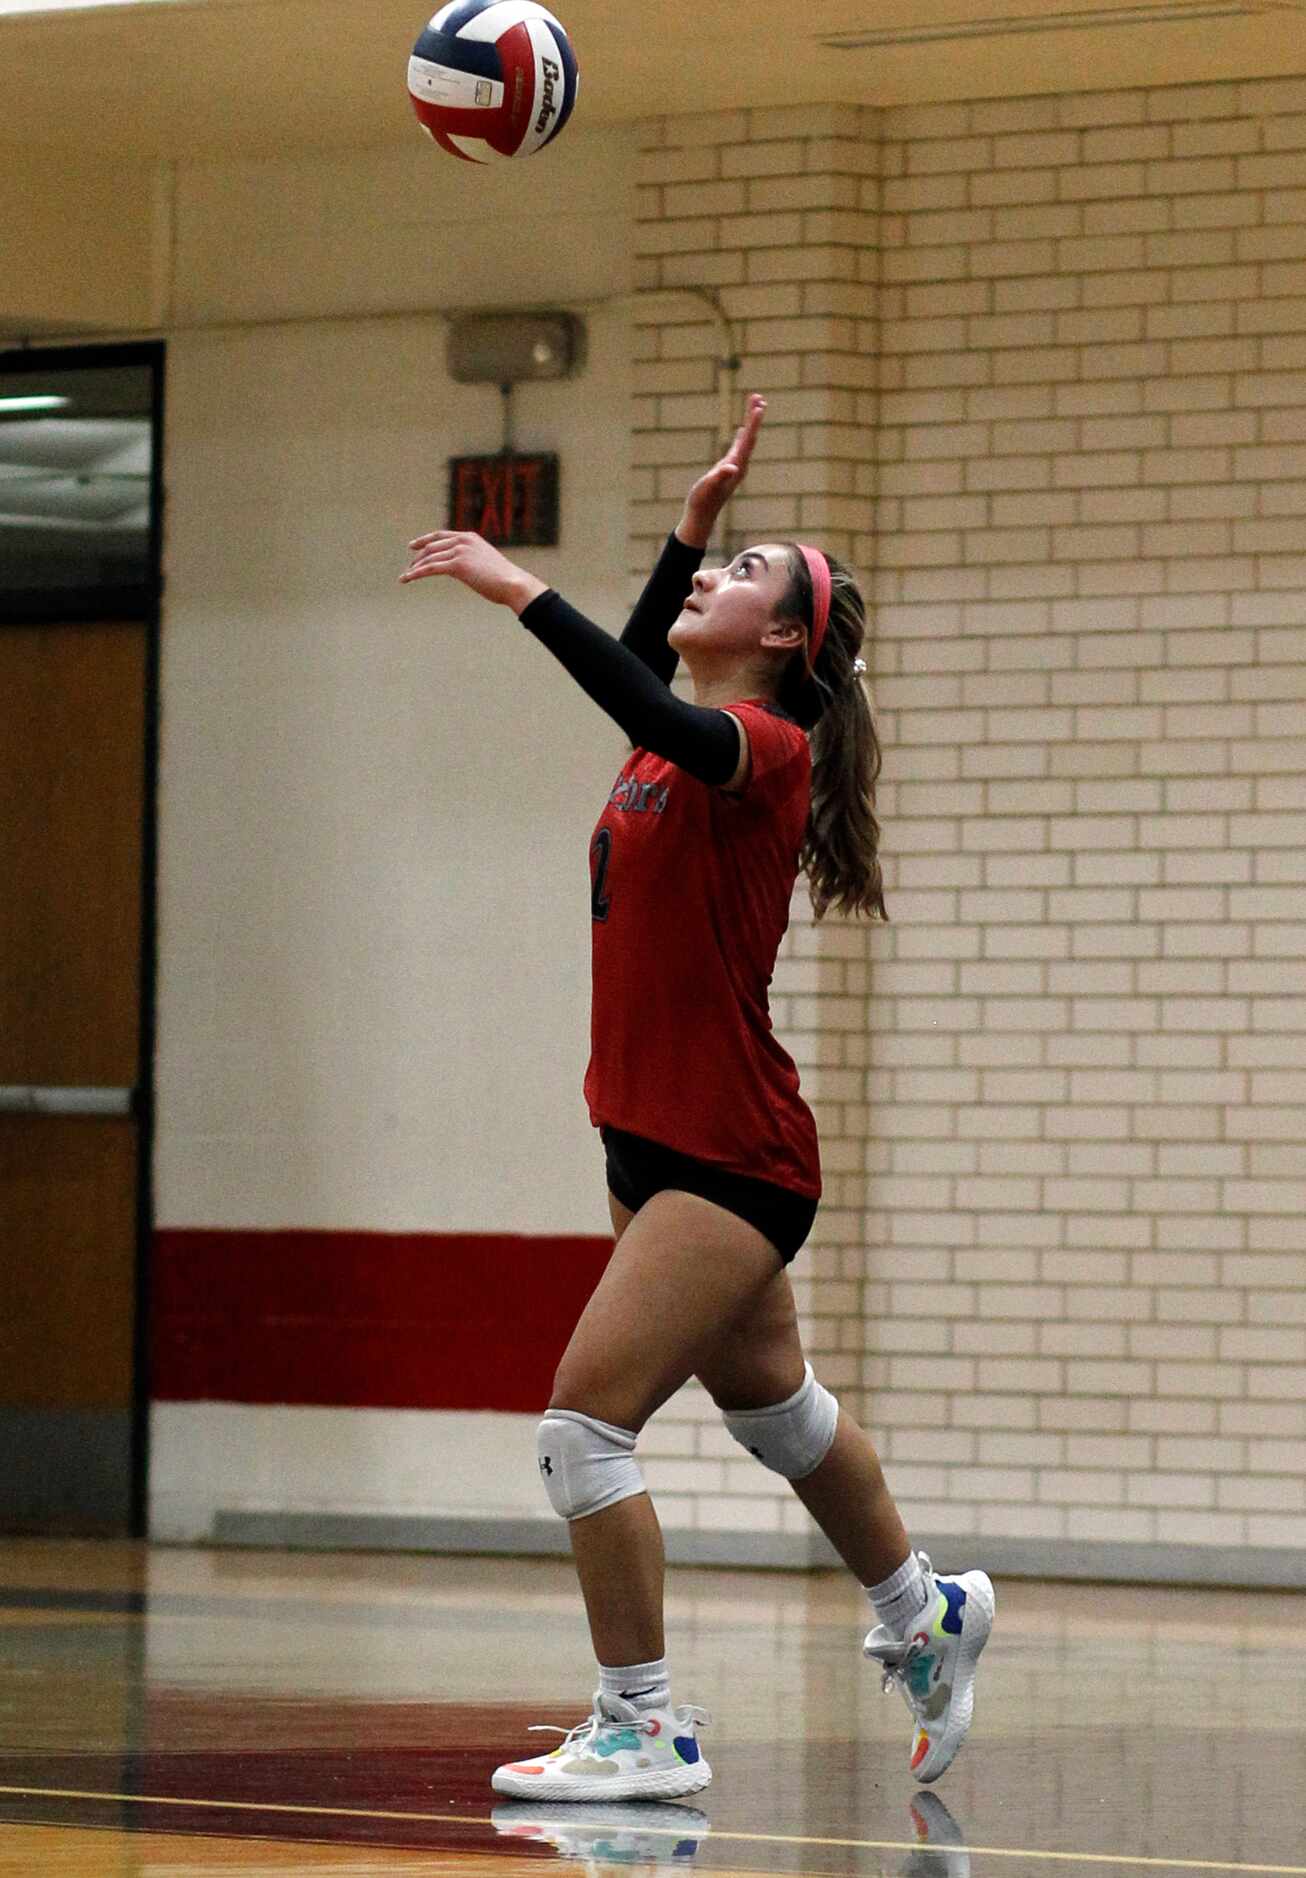 South Grand Prairie's Kylie Ramirez (2) serves during the 3rd set of their match against...